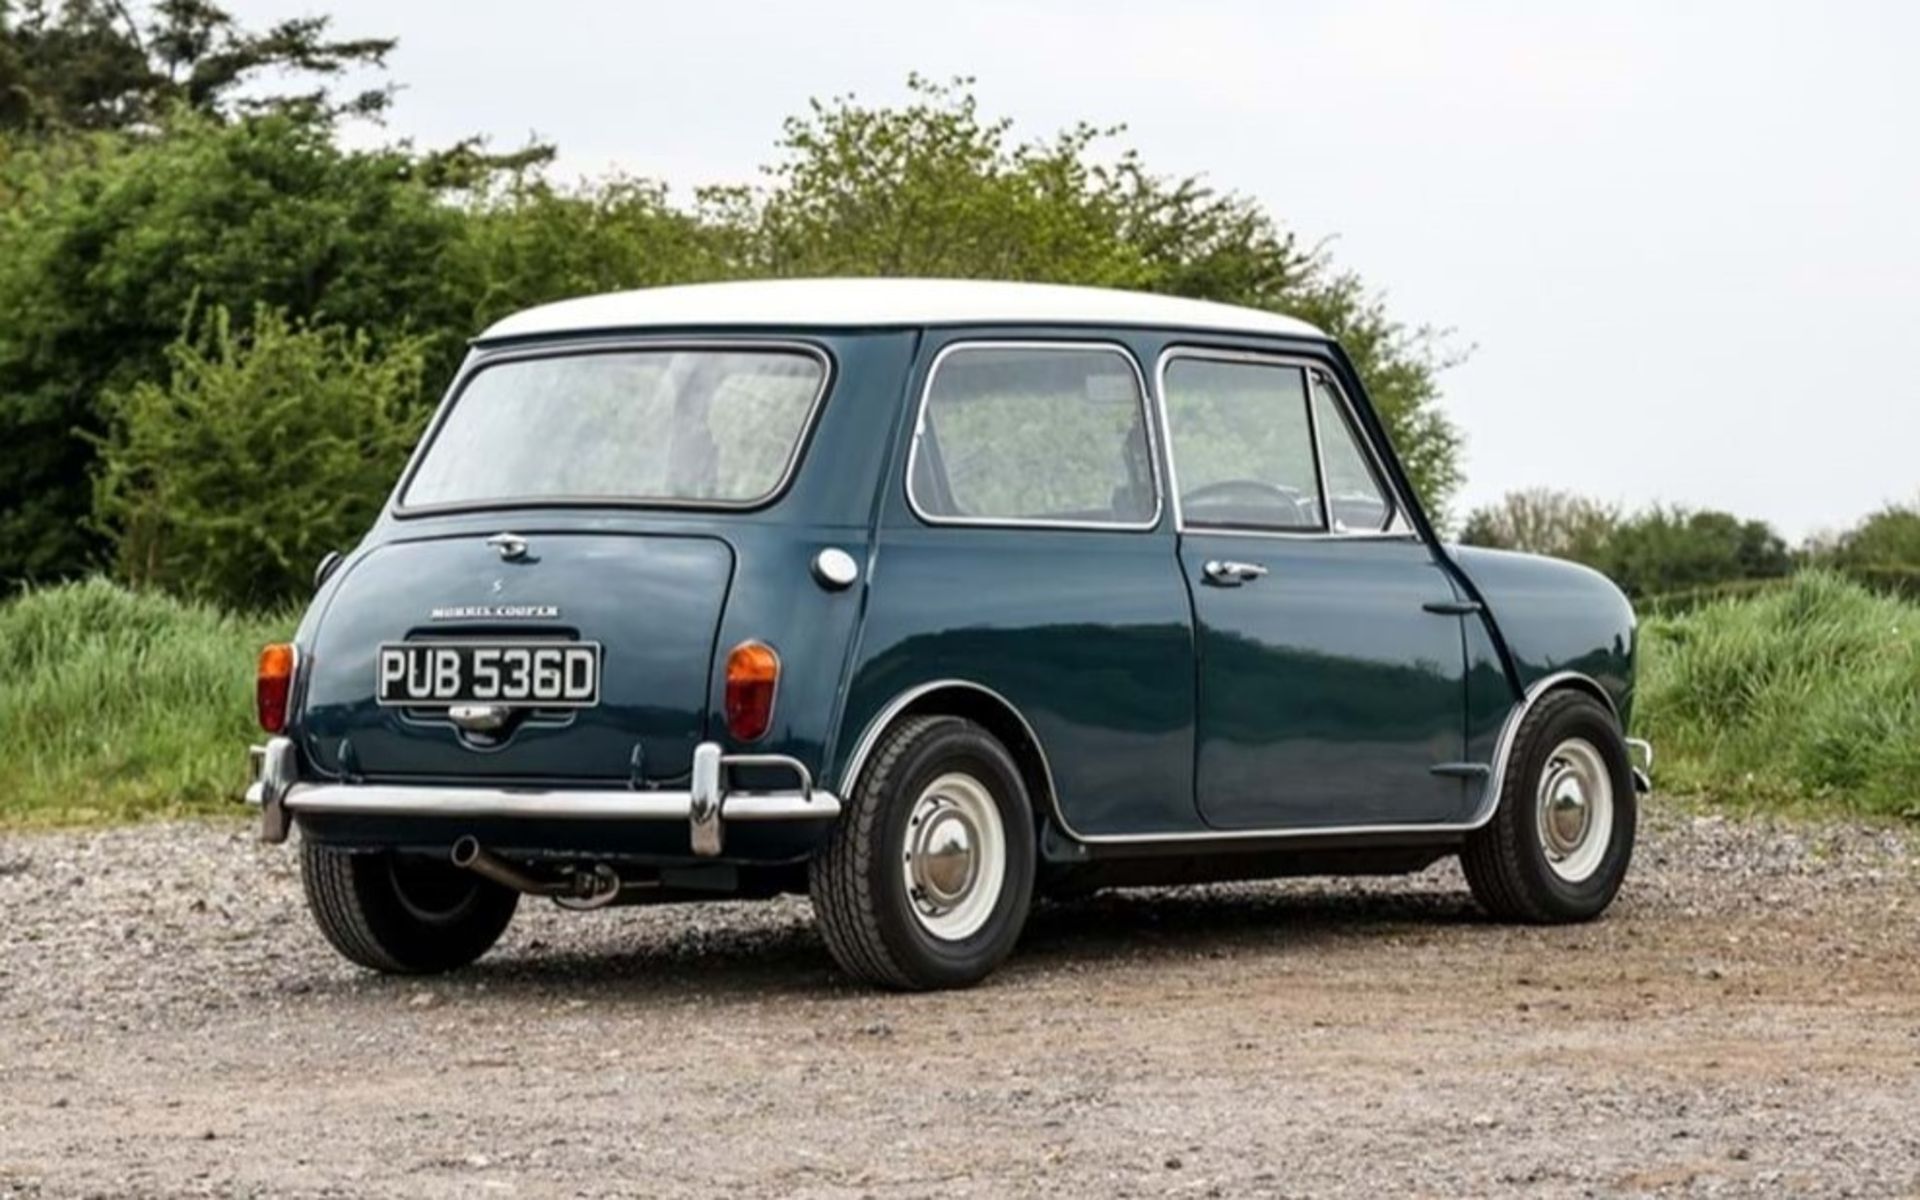 1966 MORRIS COOPER 1275 'S' Registration Number: PUB 536D Chassis Number: 1408 Recorded Mileage: TBA - Image 4 of 13